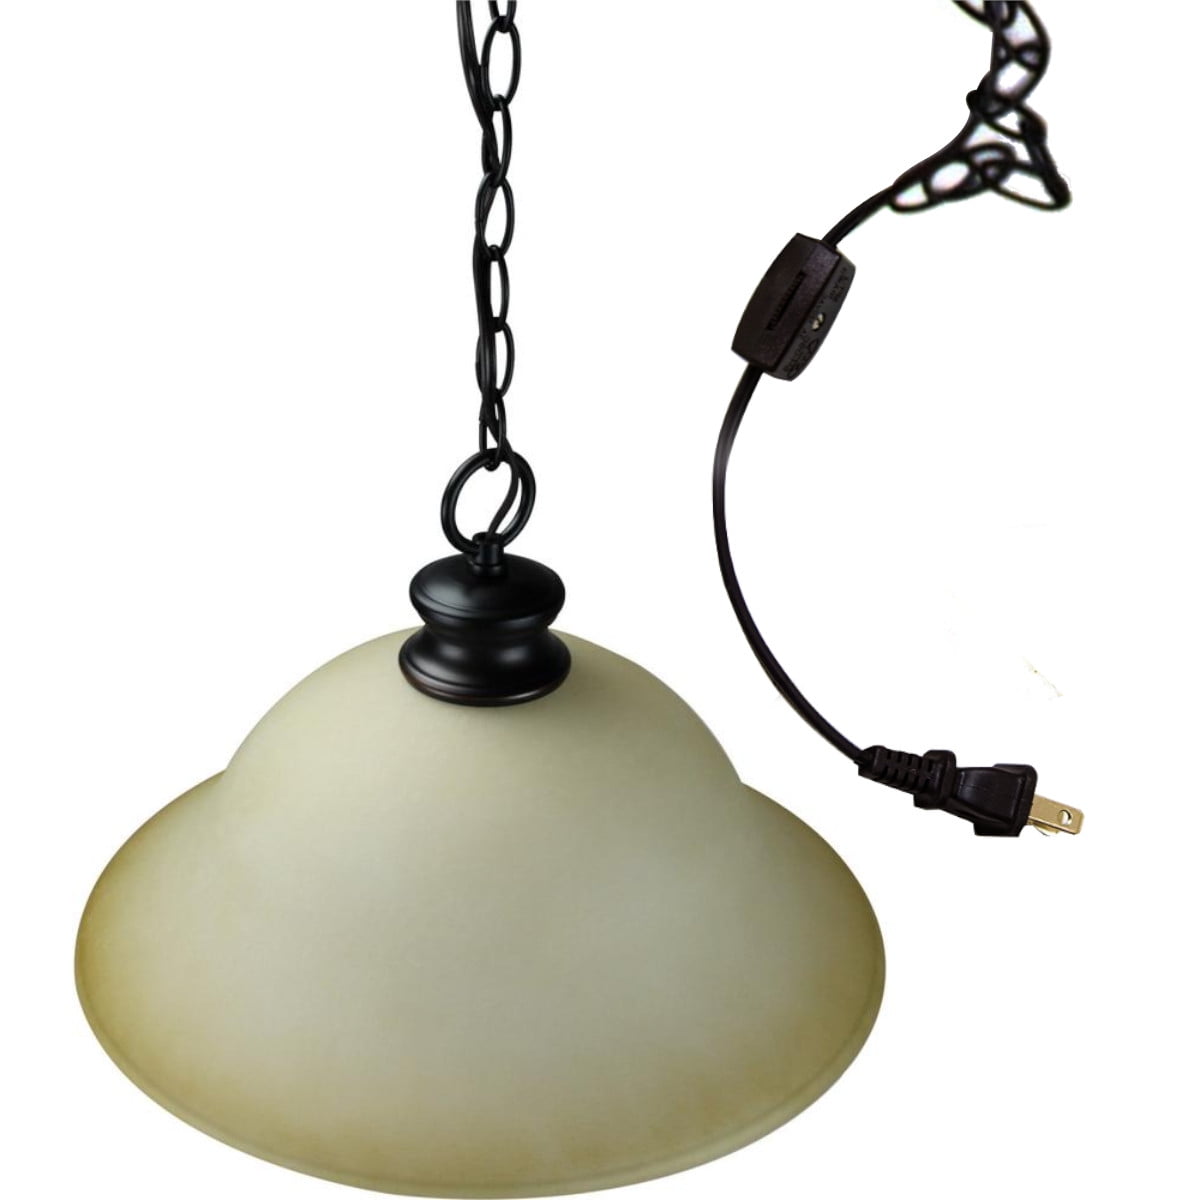 Plug In Swag Pendant Light Oil Rubbed, How To Make A Swag Lamp That Plugs In